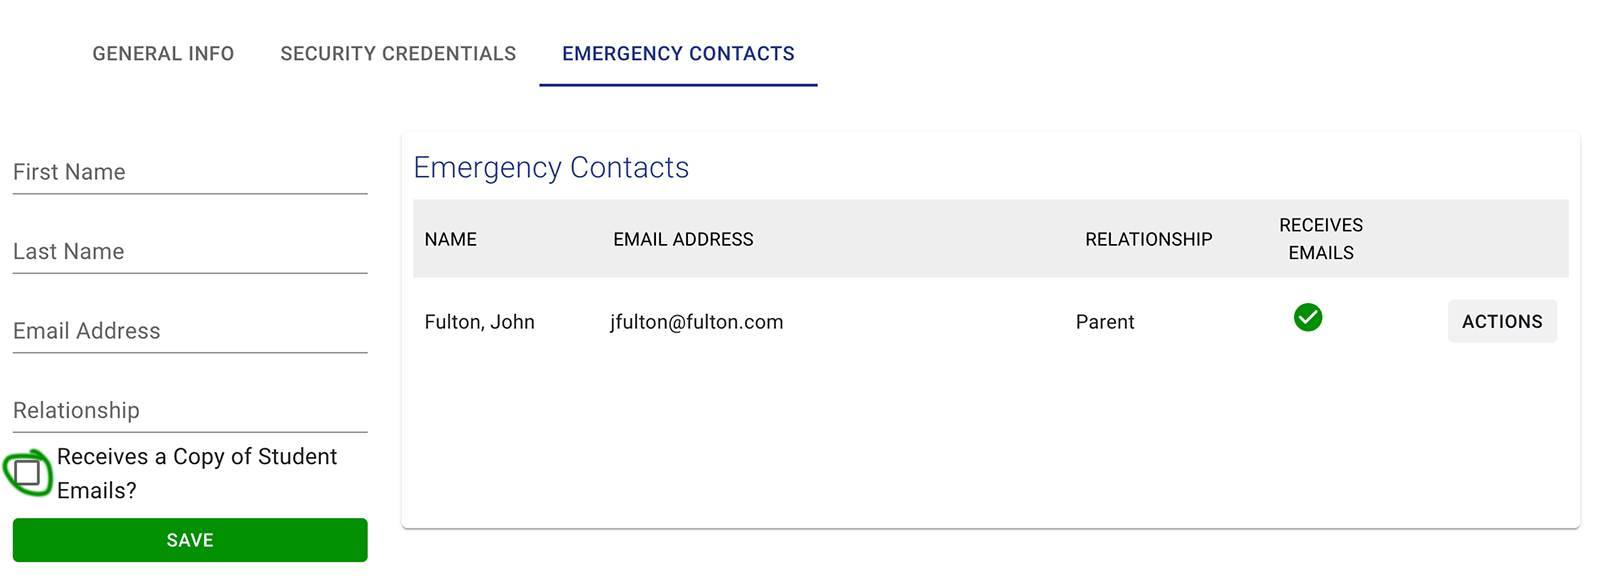 students-emergency-contacts.png